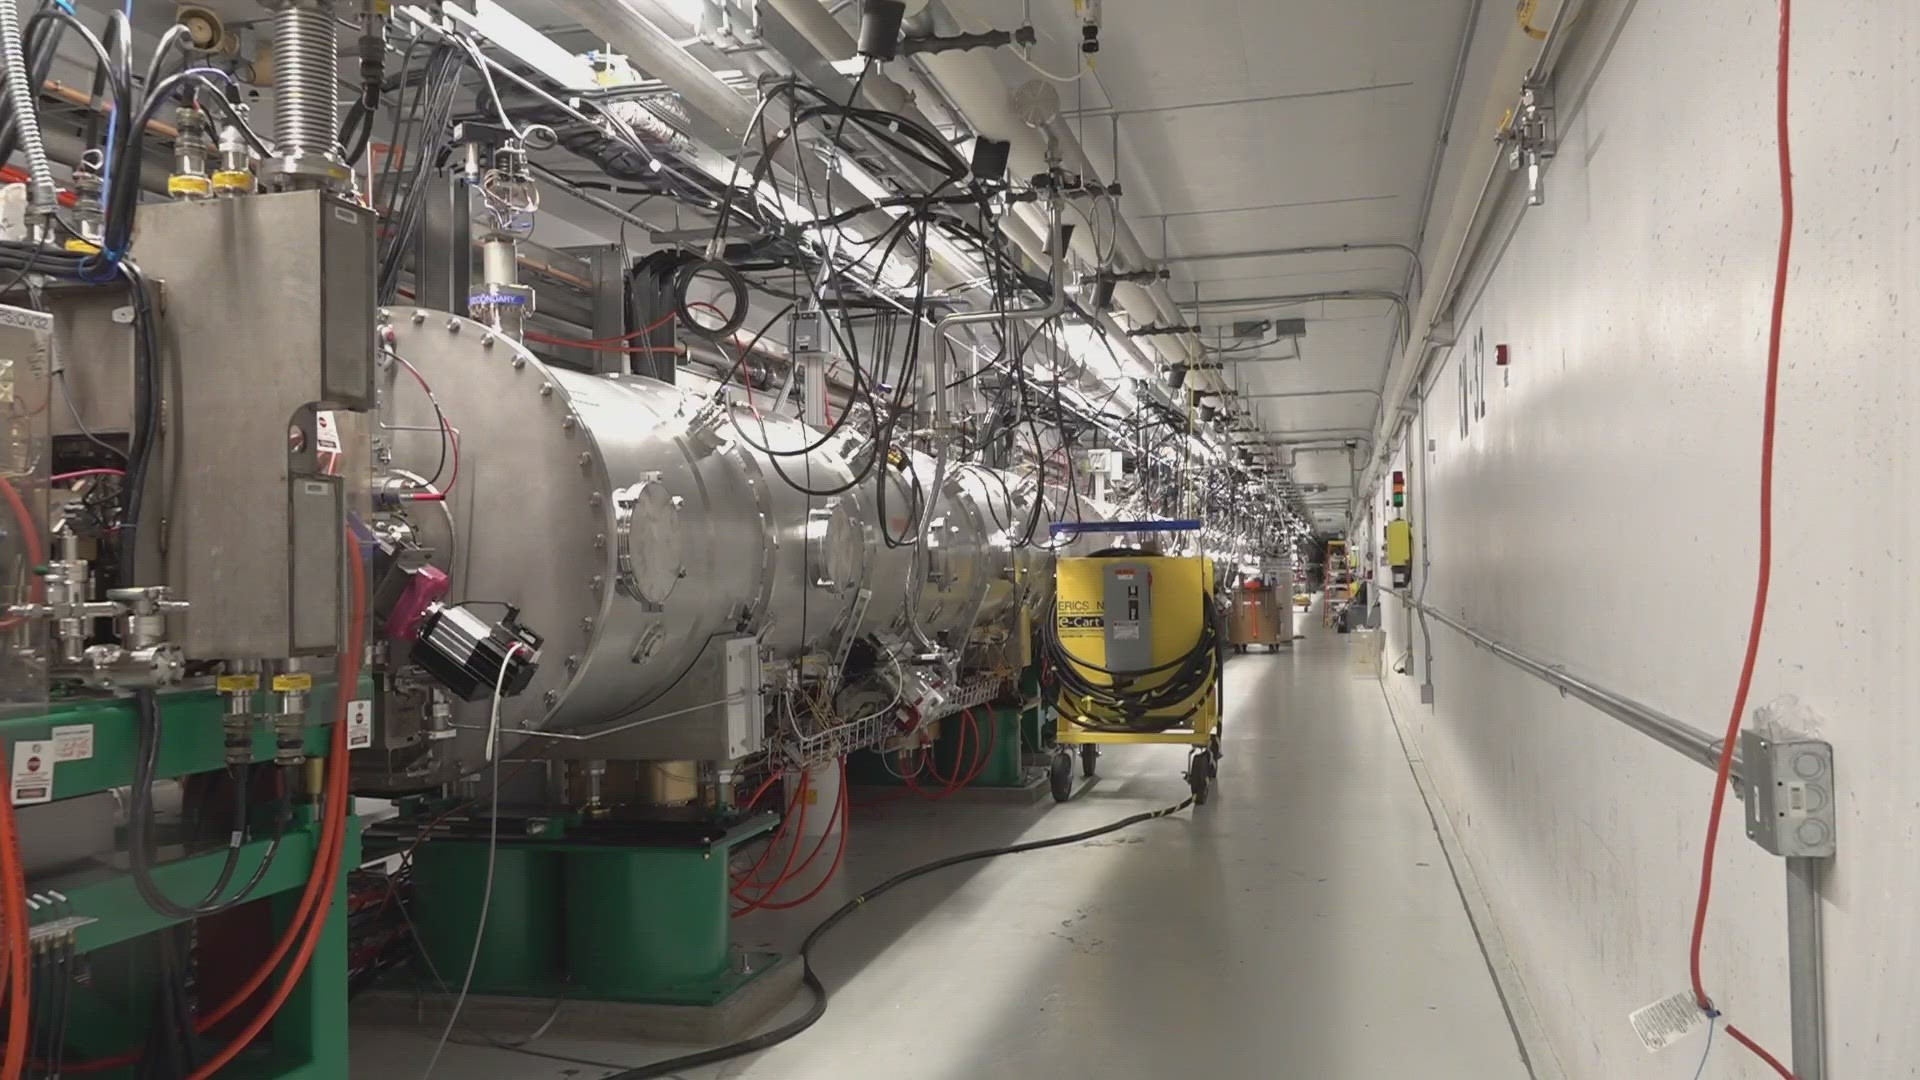 The Spallation Neutron Source fires beams of protons to a target filled with mercury, producing neutrons that are then directed to various research instruments.